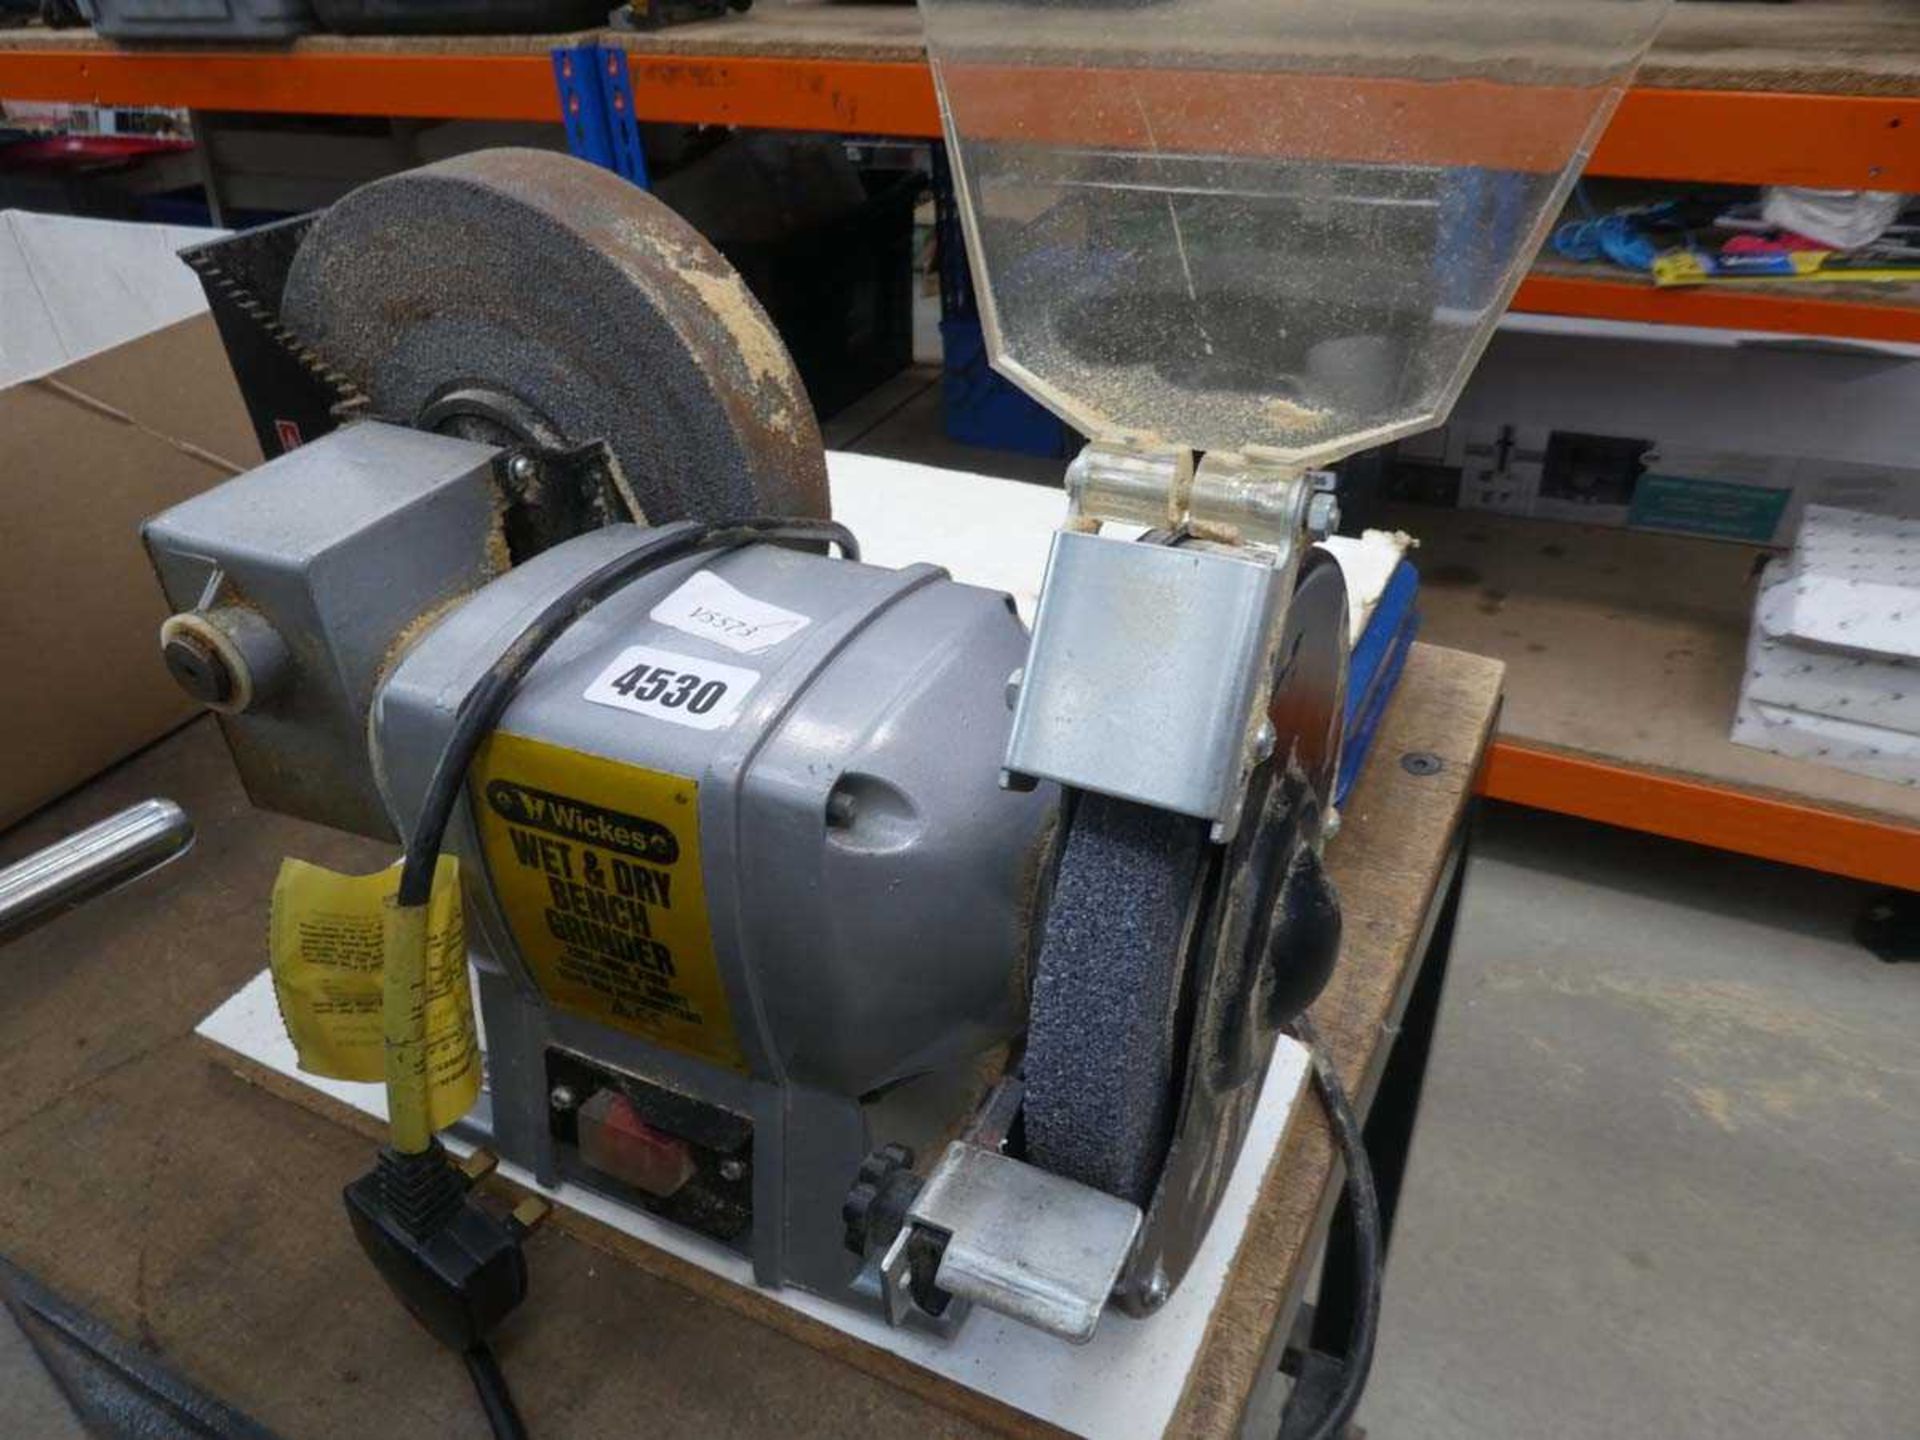 Wet and dry bench grinder